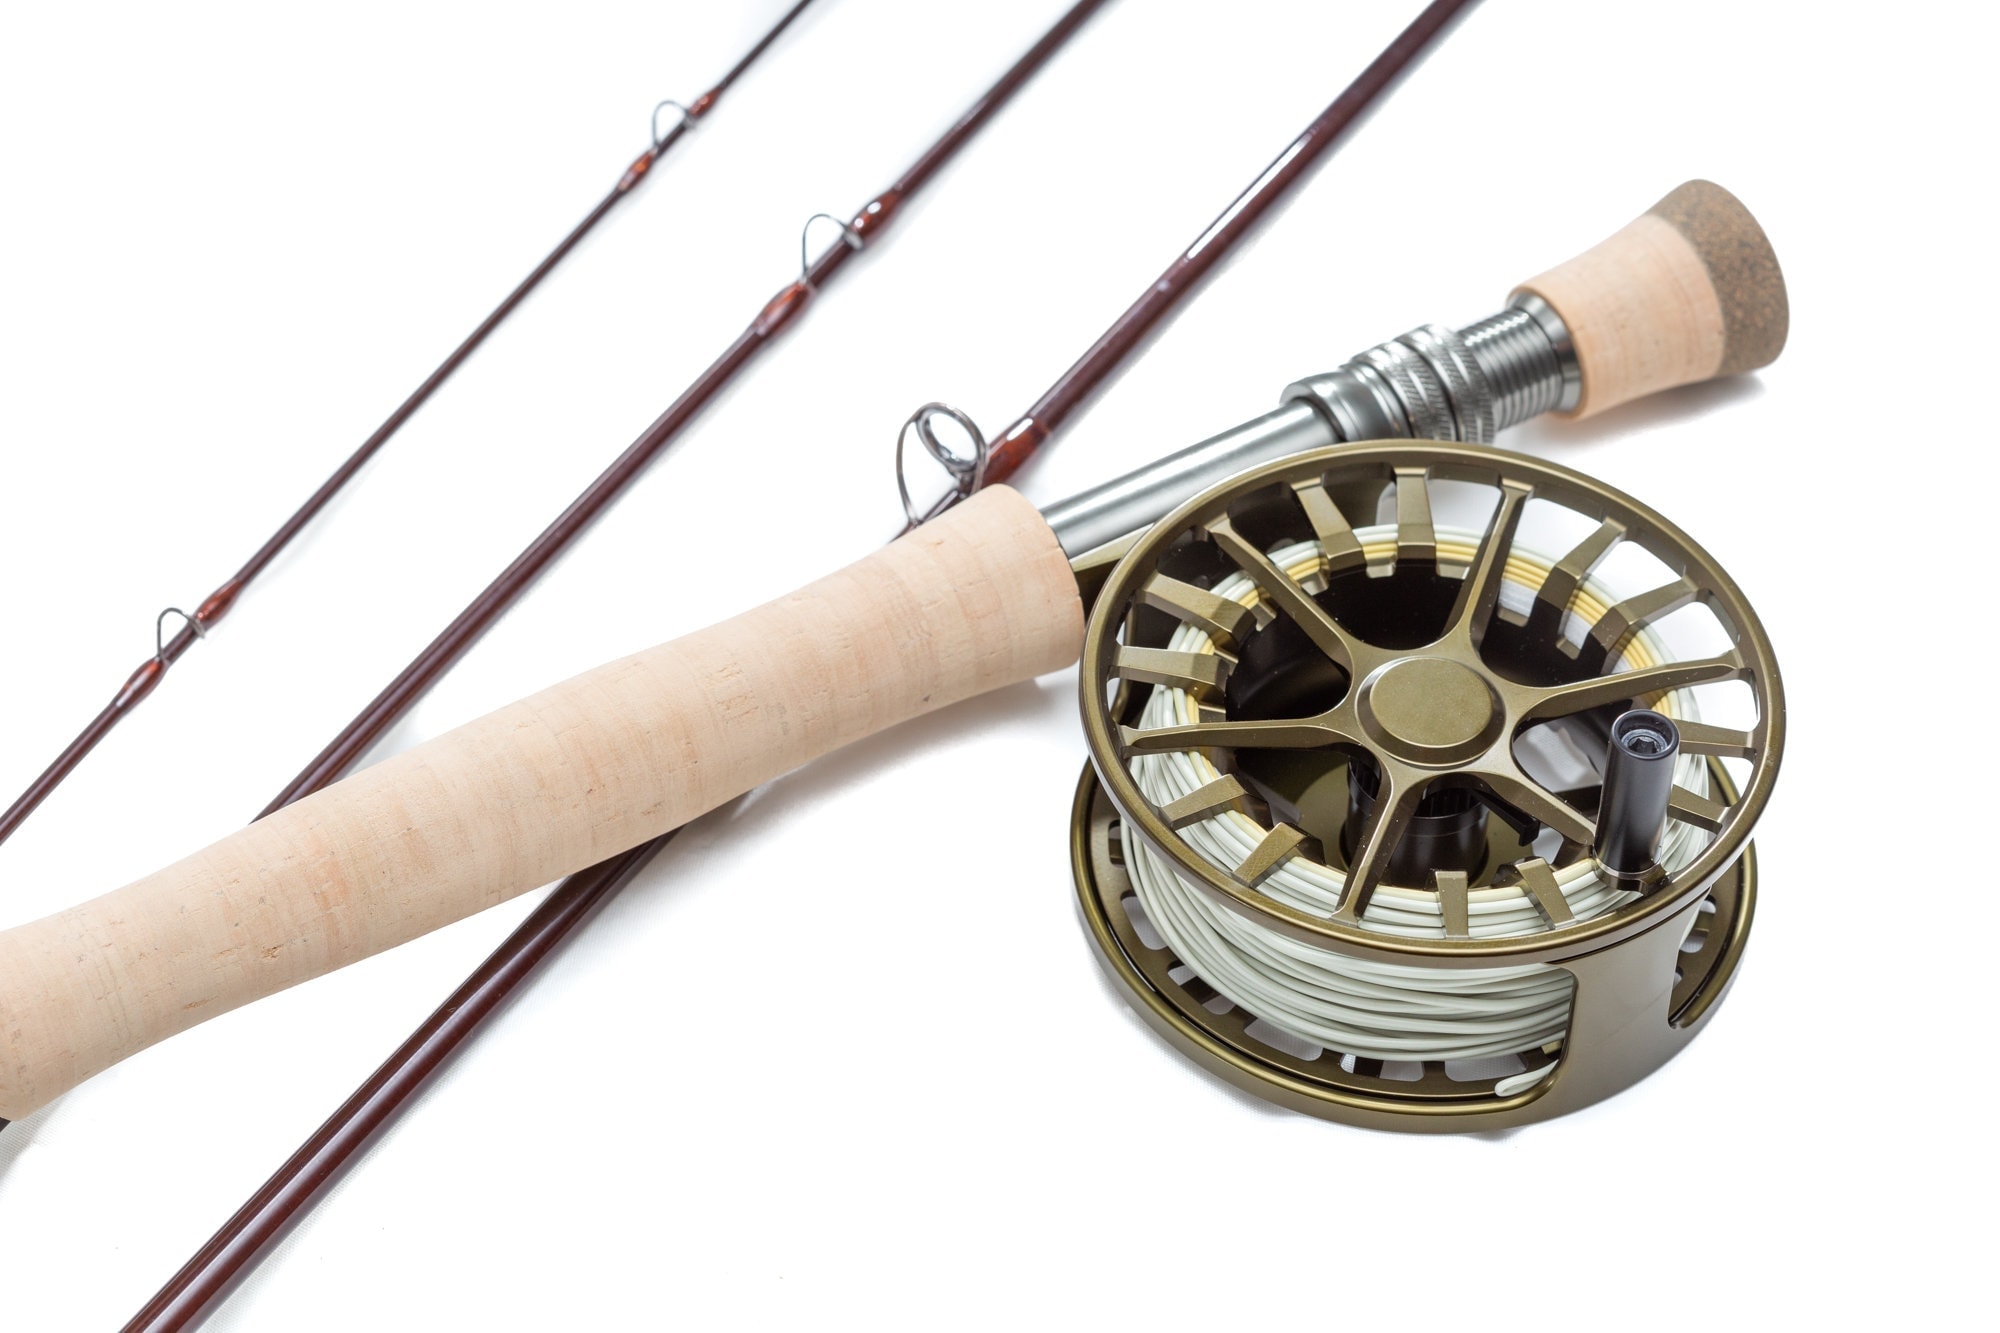 Product Details - Rick's Rods Vintage Fly Fishing Rods, Reels, and